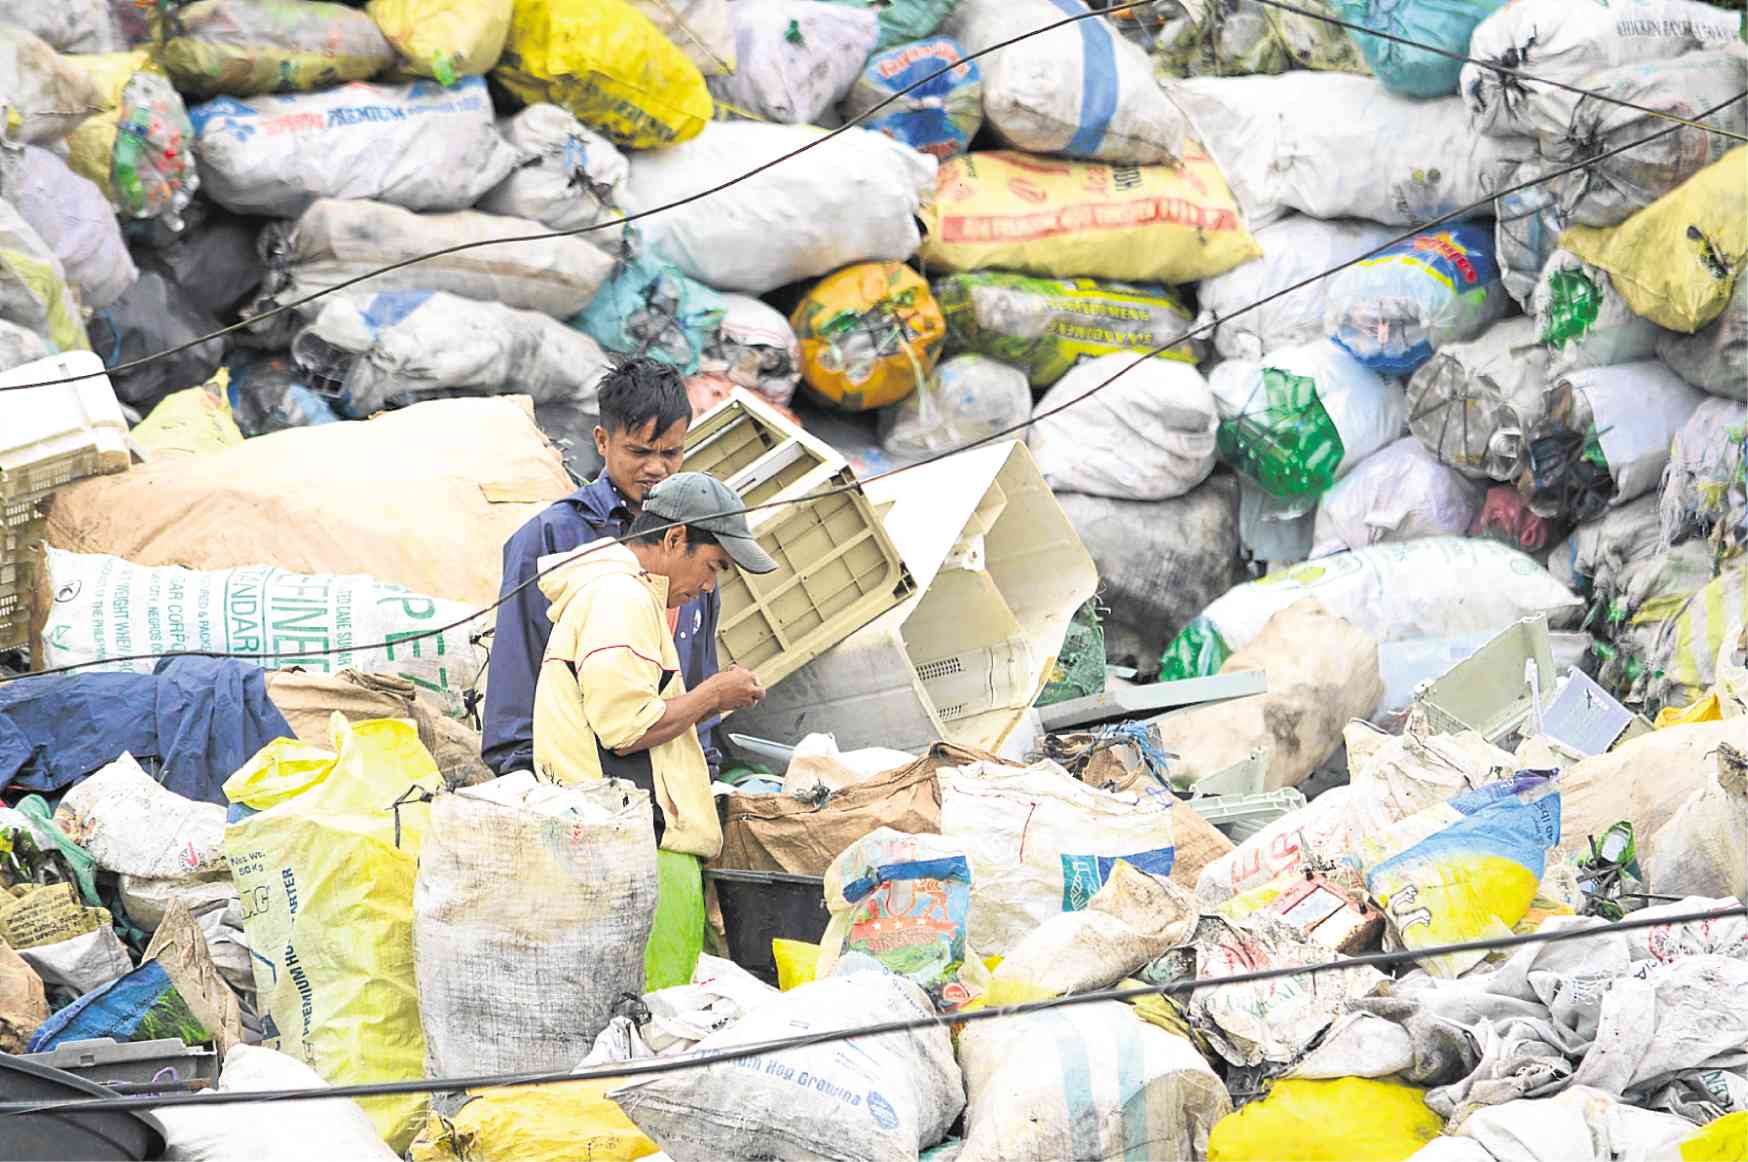 In Baguio, 3-month dump cleanup starts